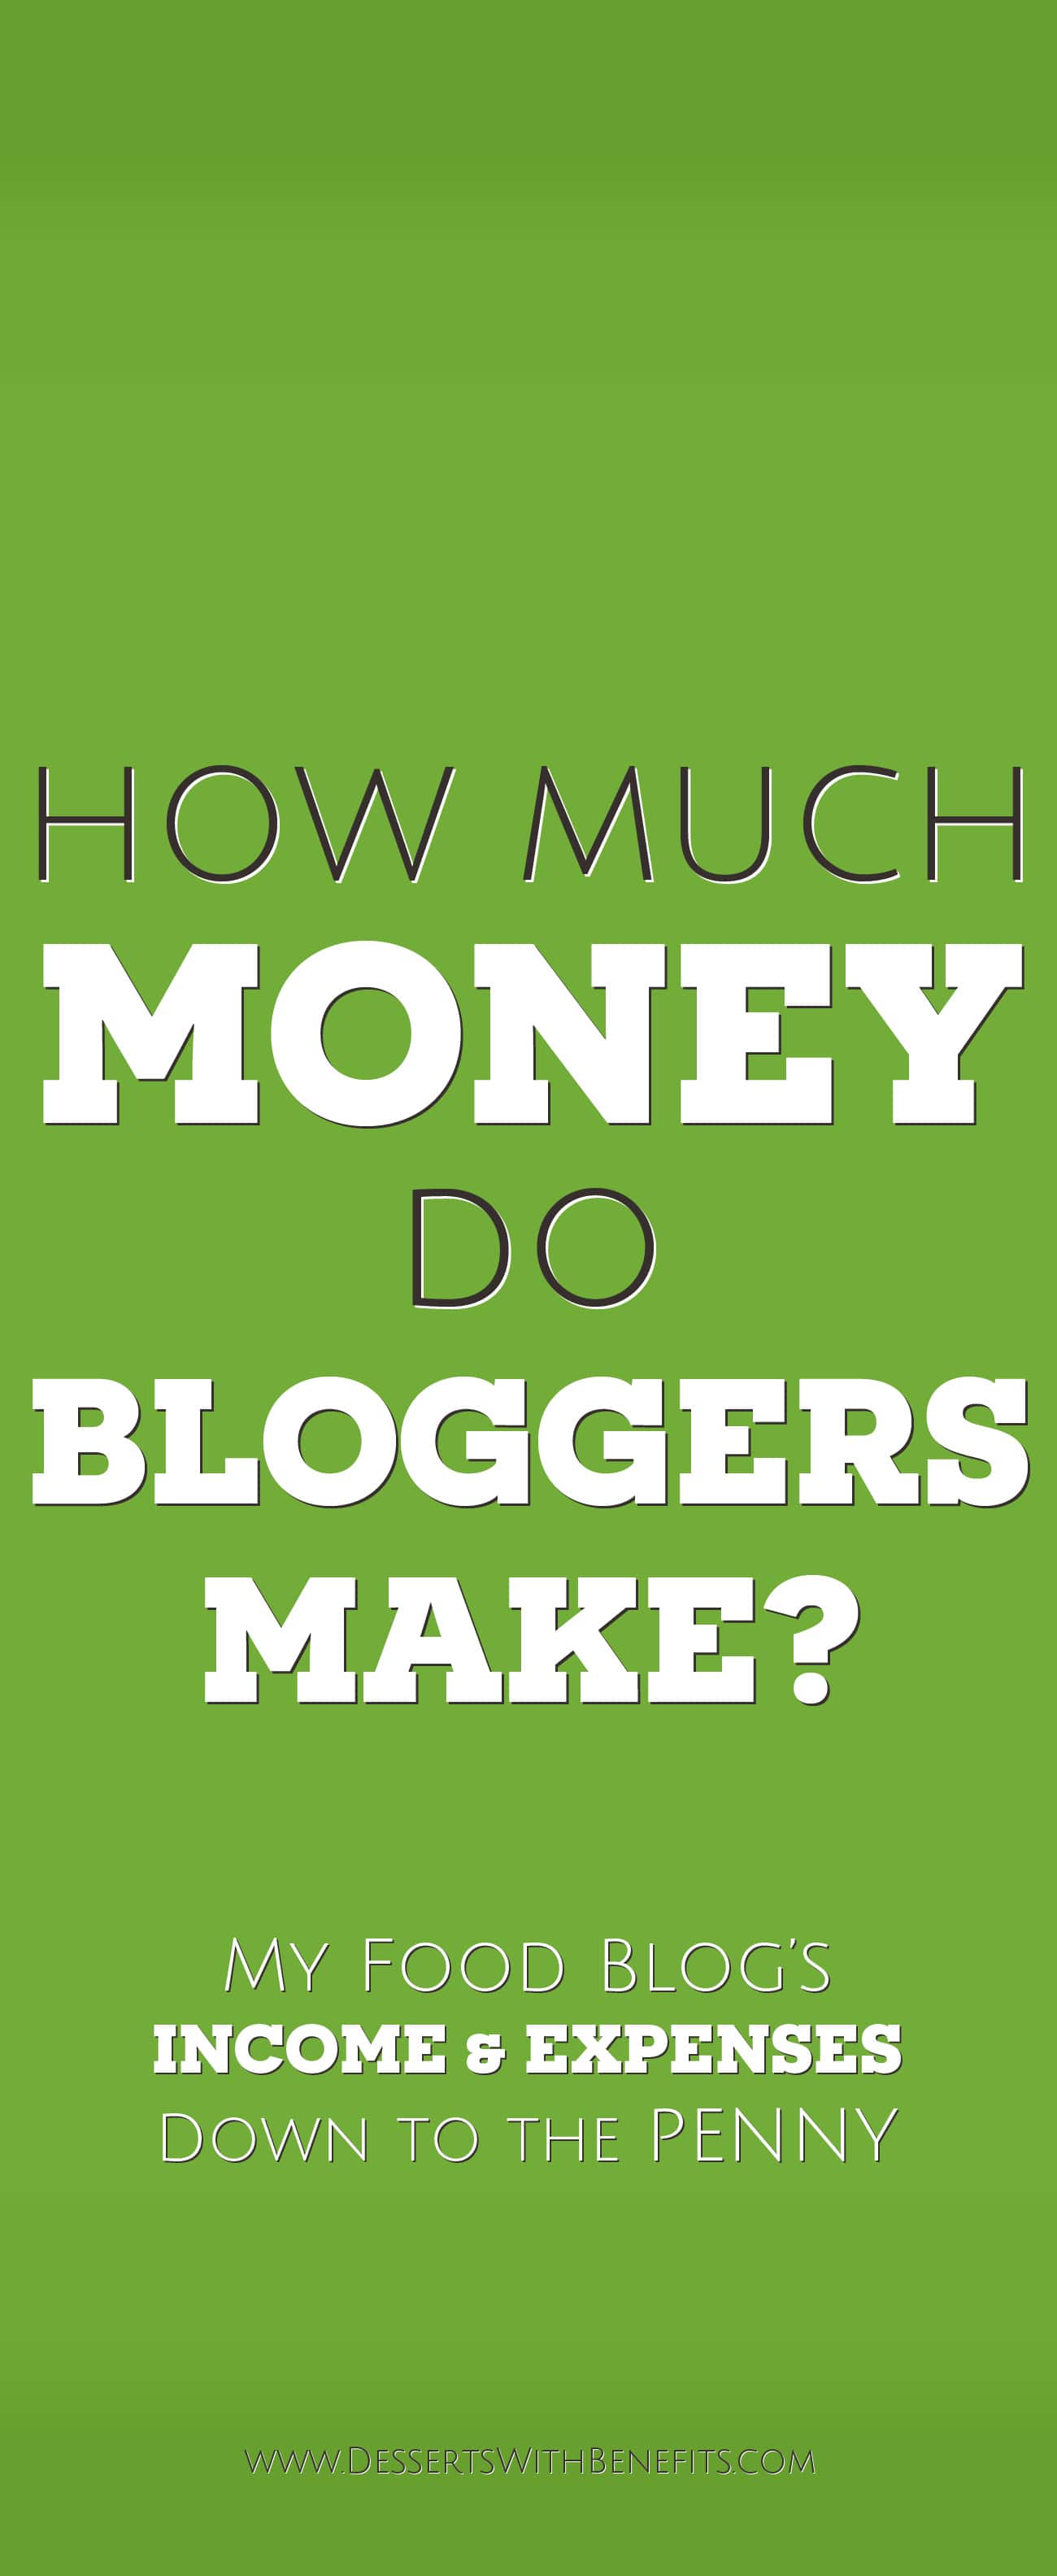 How Much Money Do Food Bloggers Make? Jessica Stier of the Desserts With Benefits Blog